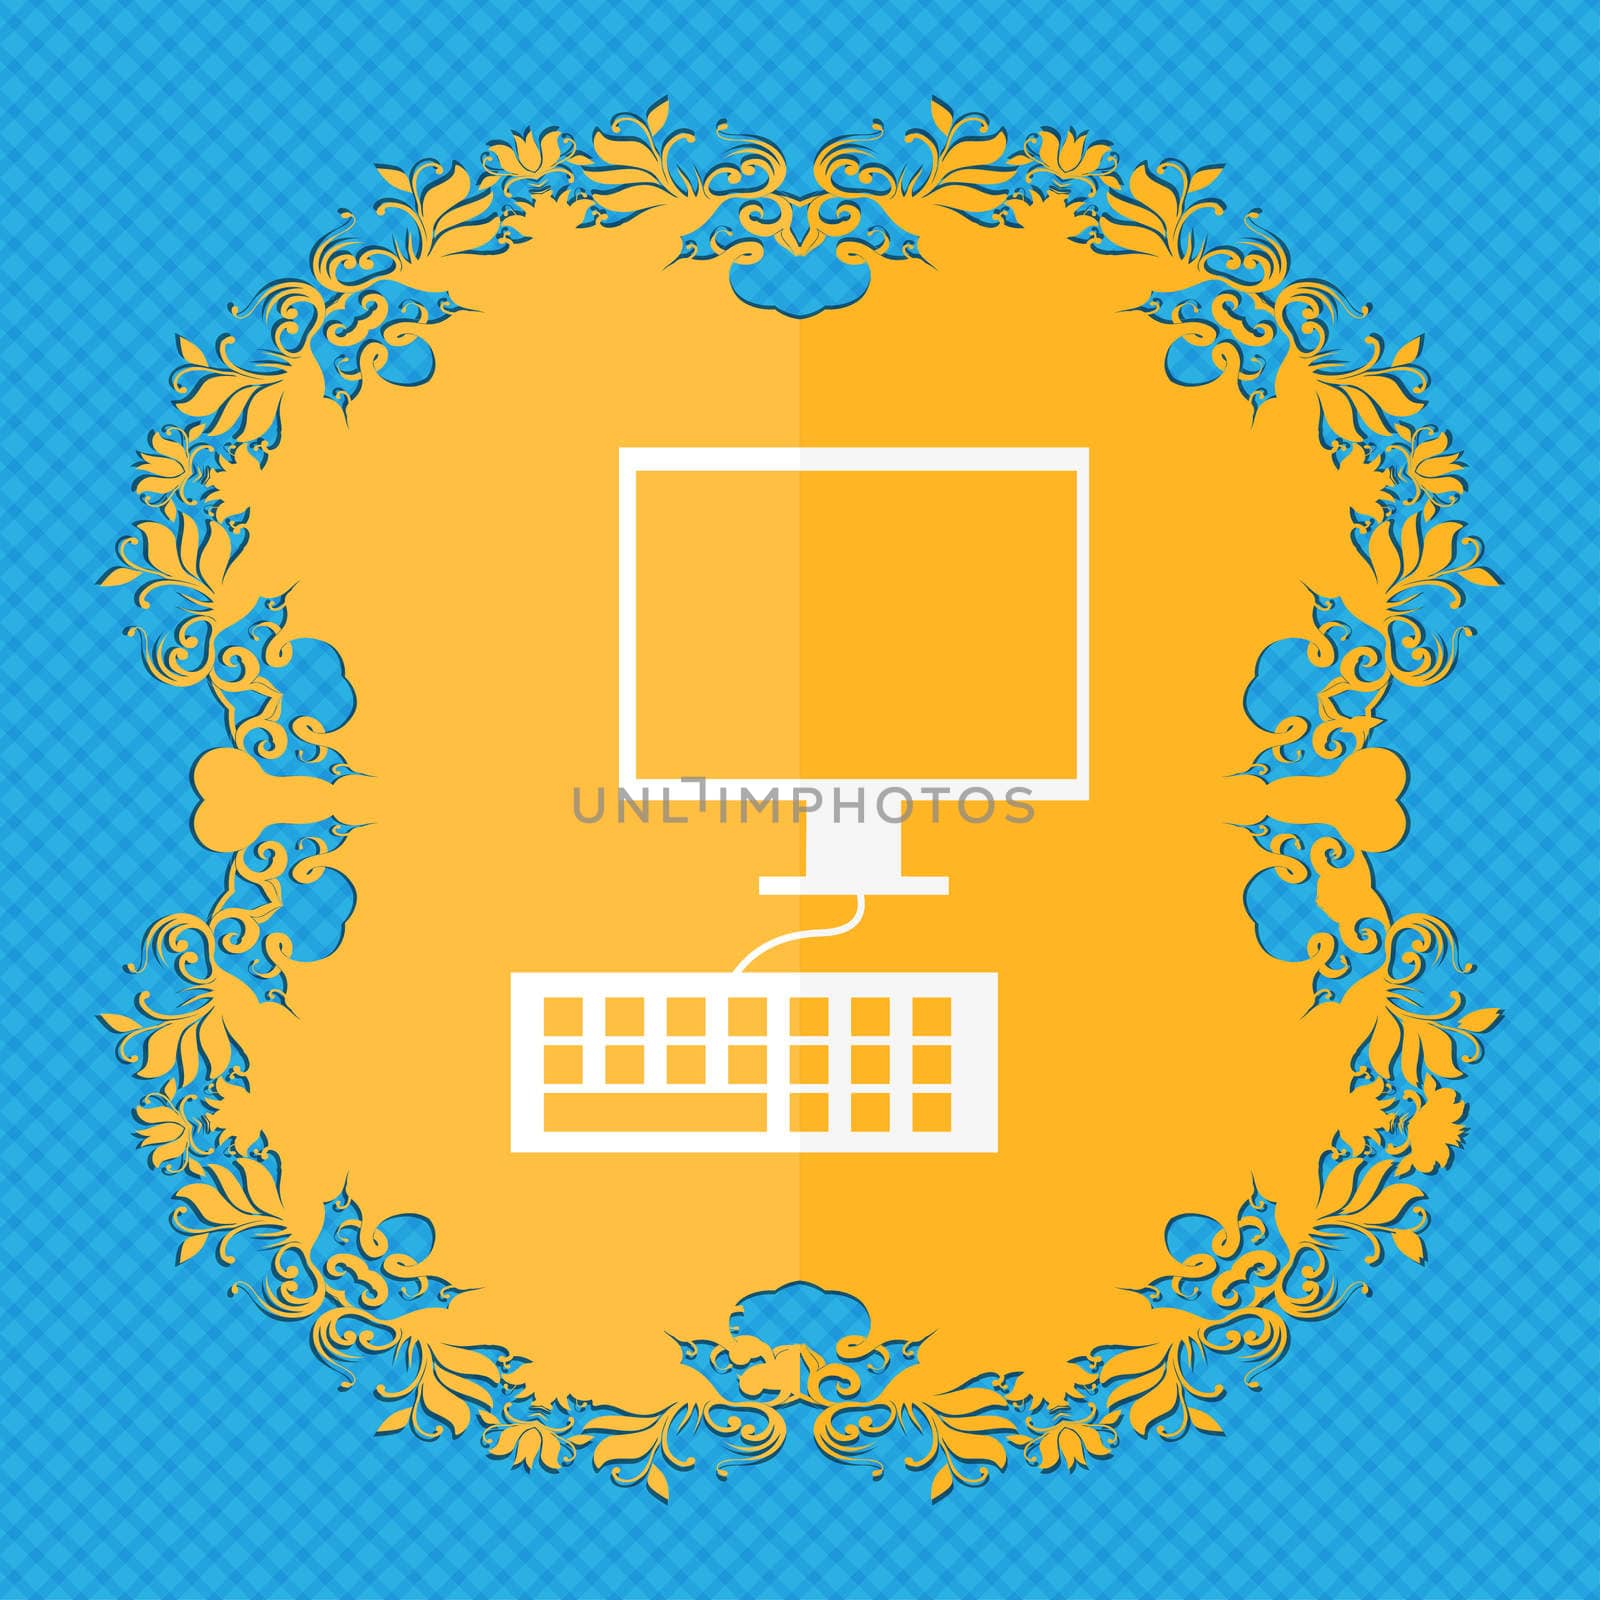 Computer monitor and keyboard Icon. Floral flat design on a blue abstract background with place for your text. illustration